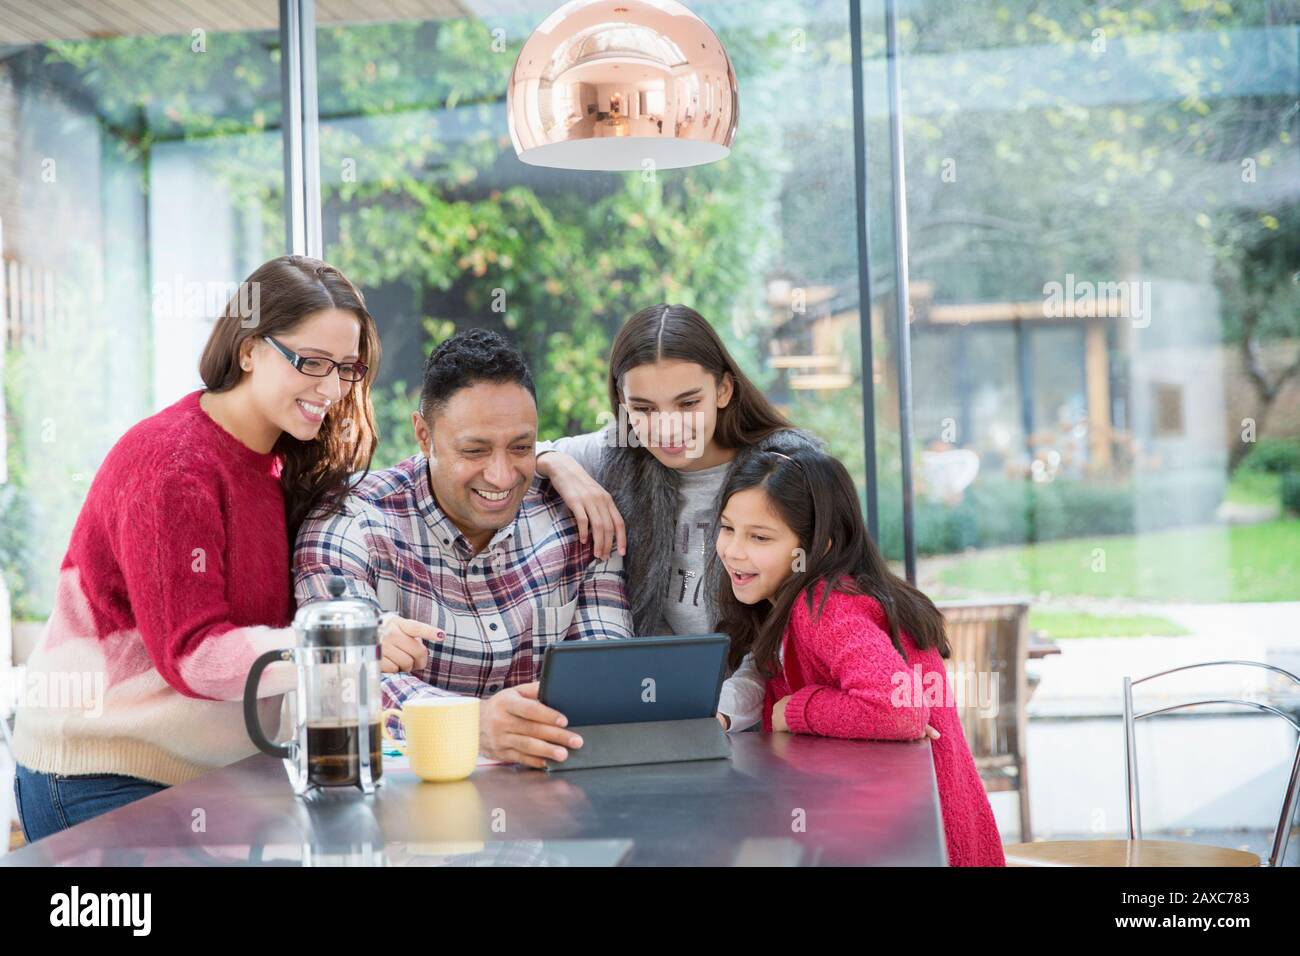 Happy family using digital tablet at kitchen table Stock Photo